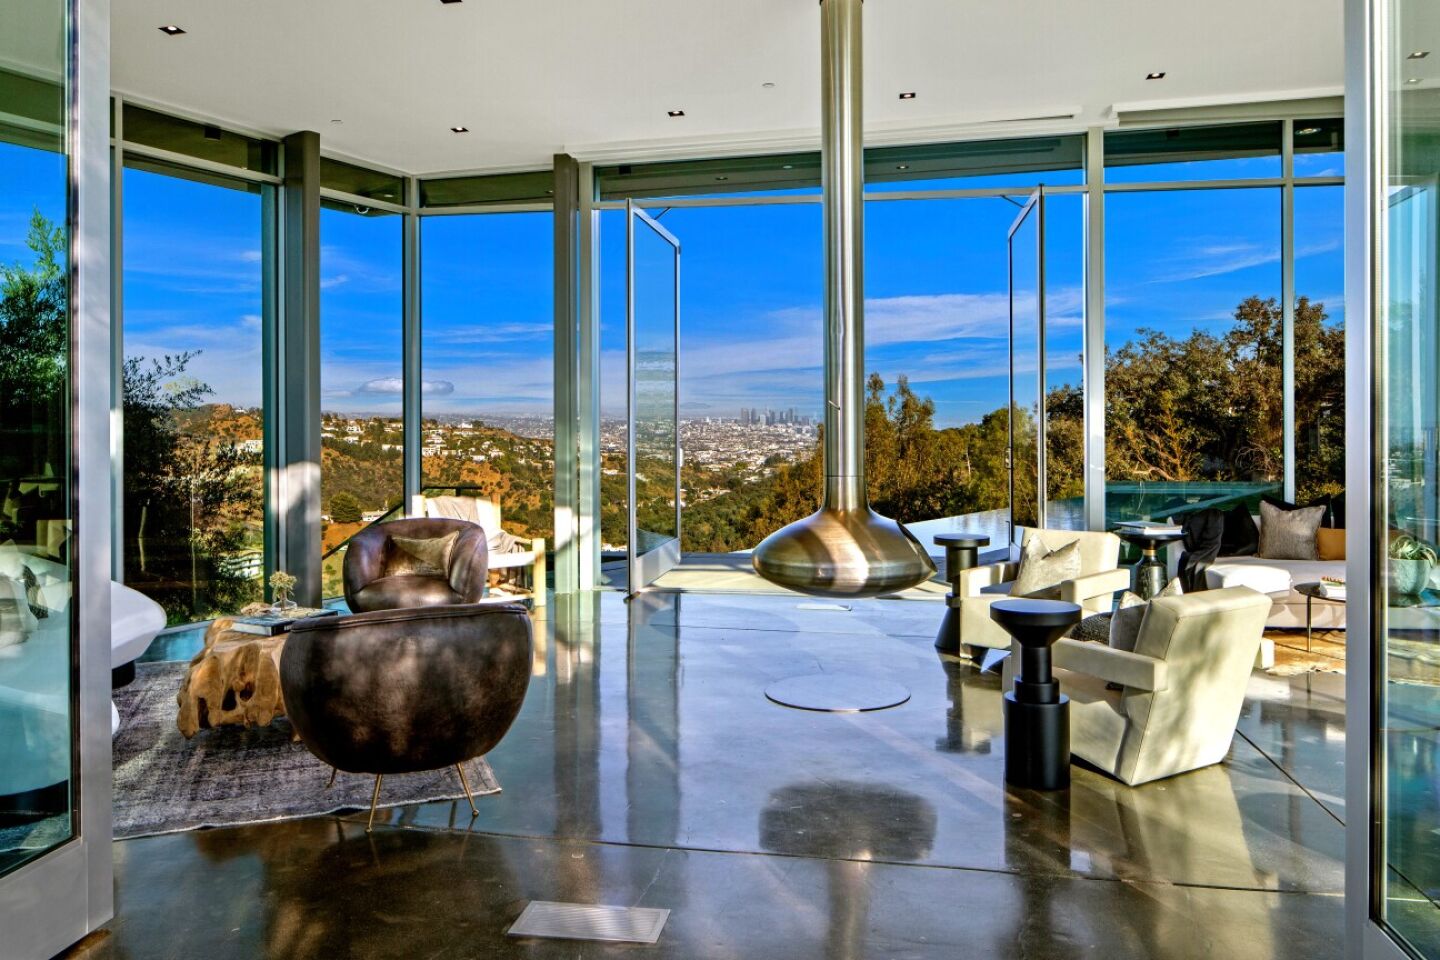 The living room has glass walls, a shiny floor and furniture overlooking greenery and sky.